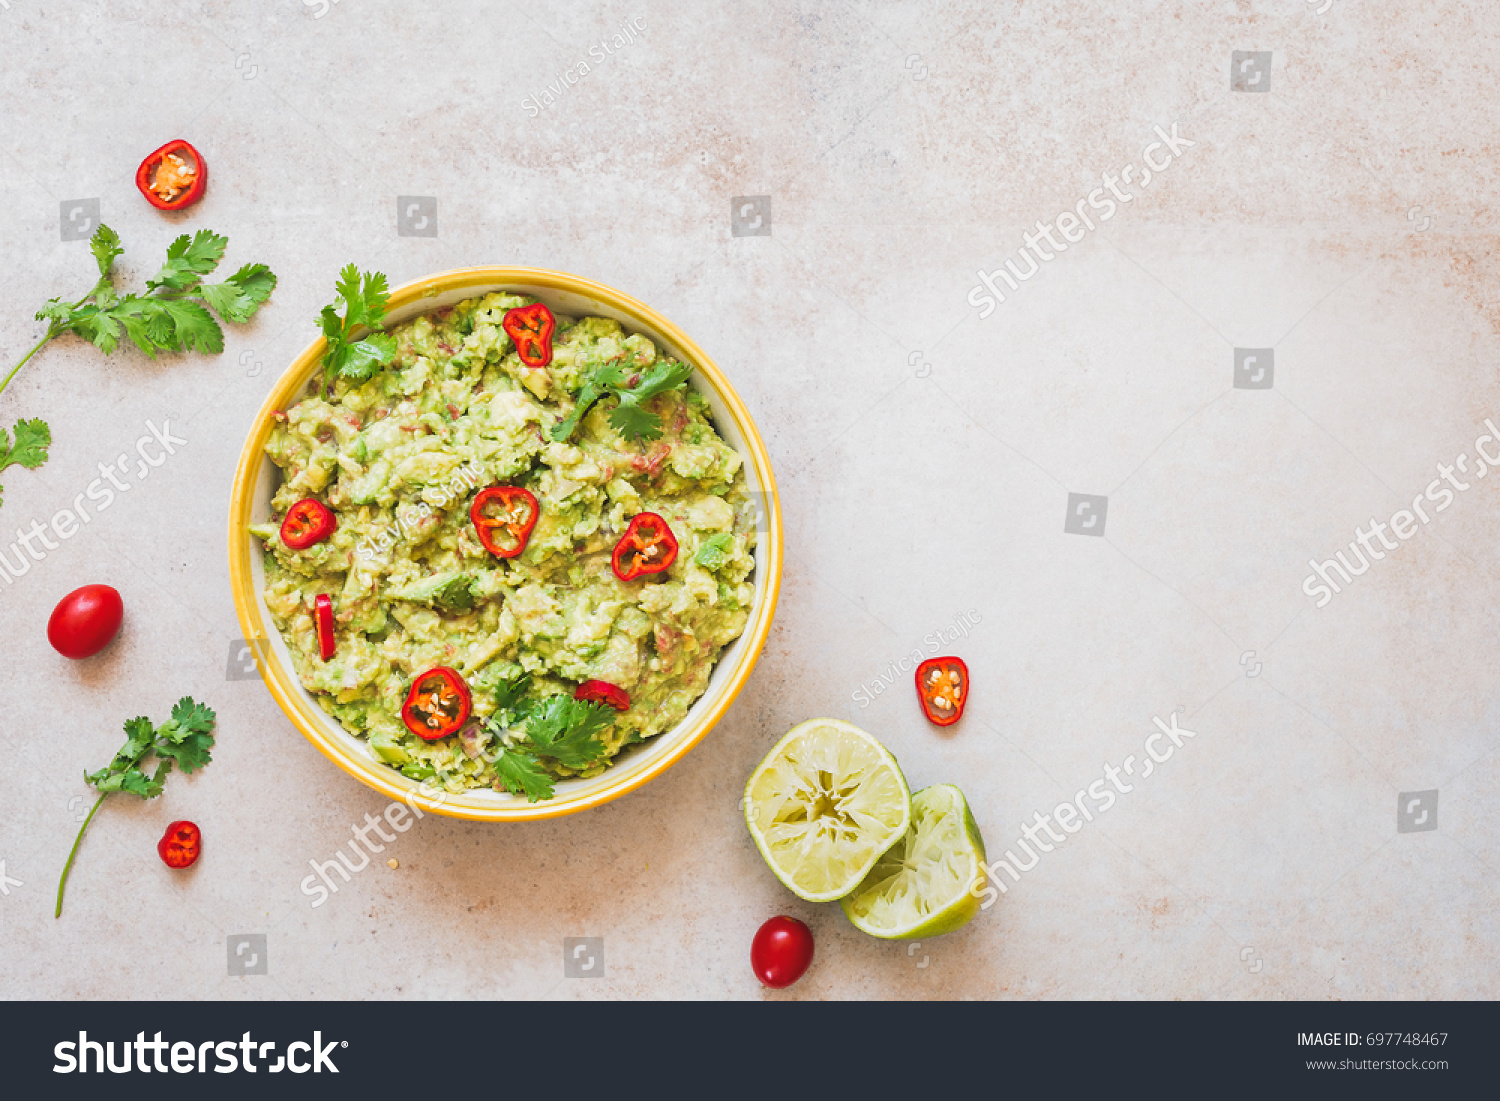 Fresh guacamole dip with ingredients on rustic stone background. Top view, lots of copy space #697748467